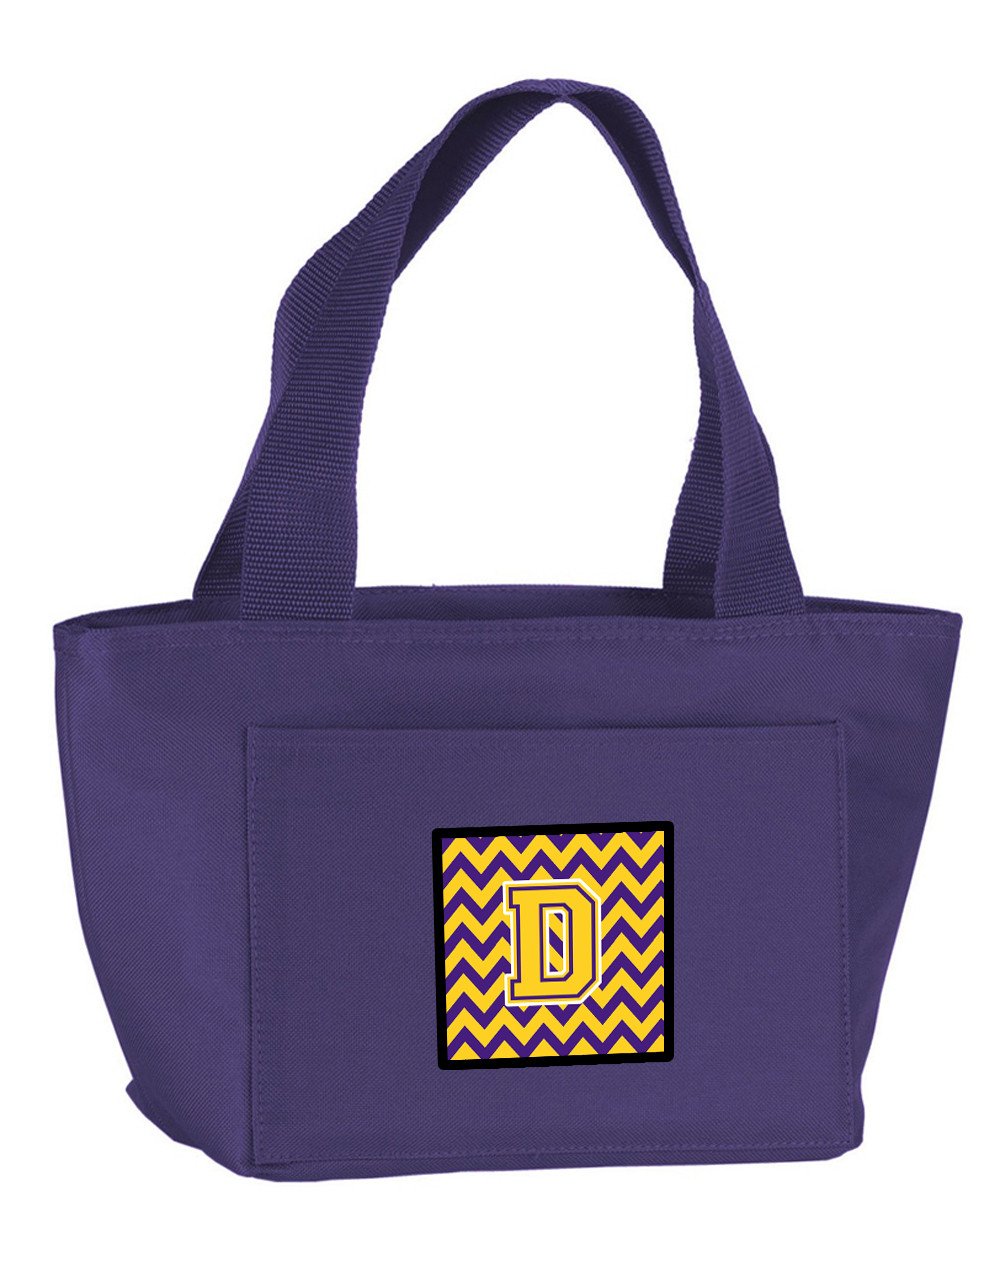 Letter D Chevron Purple and Gold Lunch Bag CJ1041-DPR-8808 by Caroline's Treasures